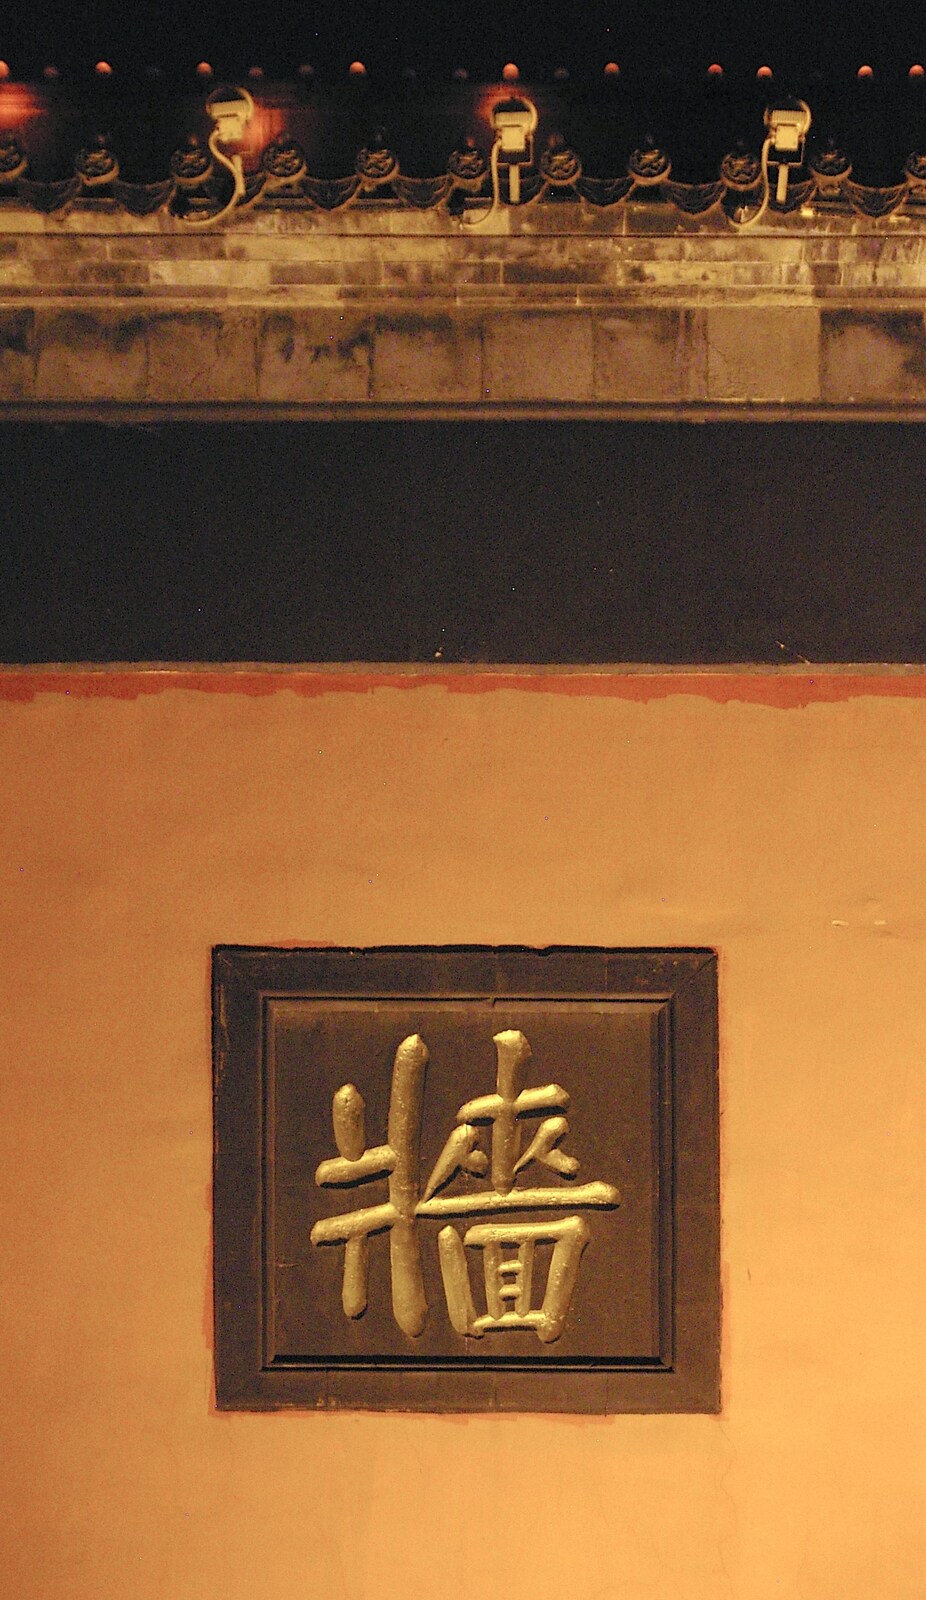 A Chinese character on the Chaotin Temple wall from Nanjing by Night, Nanjing, Jiangsu Province, China - 4th October 2006